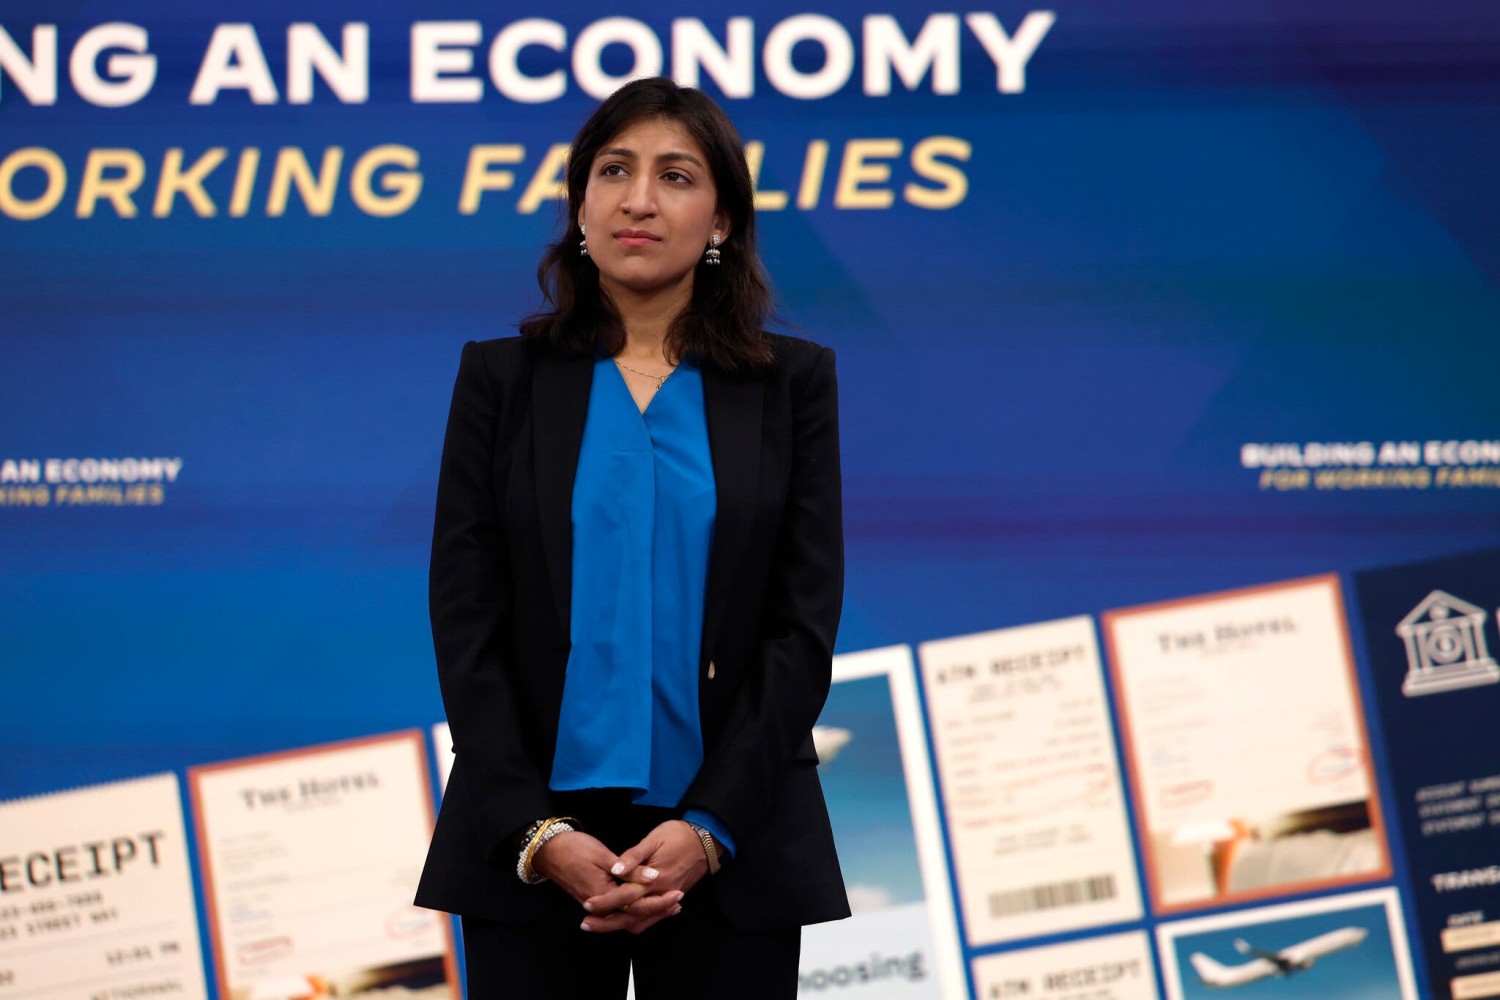 Lina Khan has argued that even legal defeats could result in tougher antitrust enforcement, but recent rulings have emboldened her critics.Credit...Anna Moneymaker/Getty Images